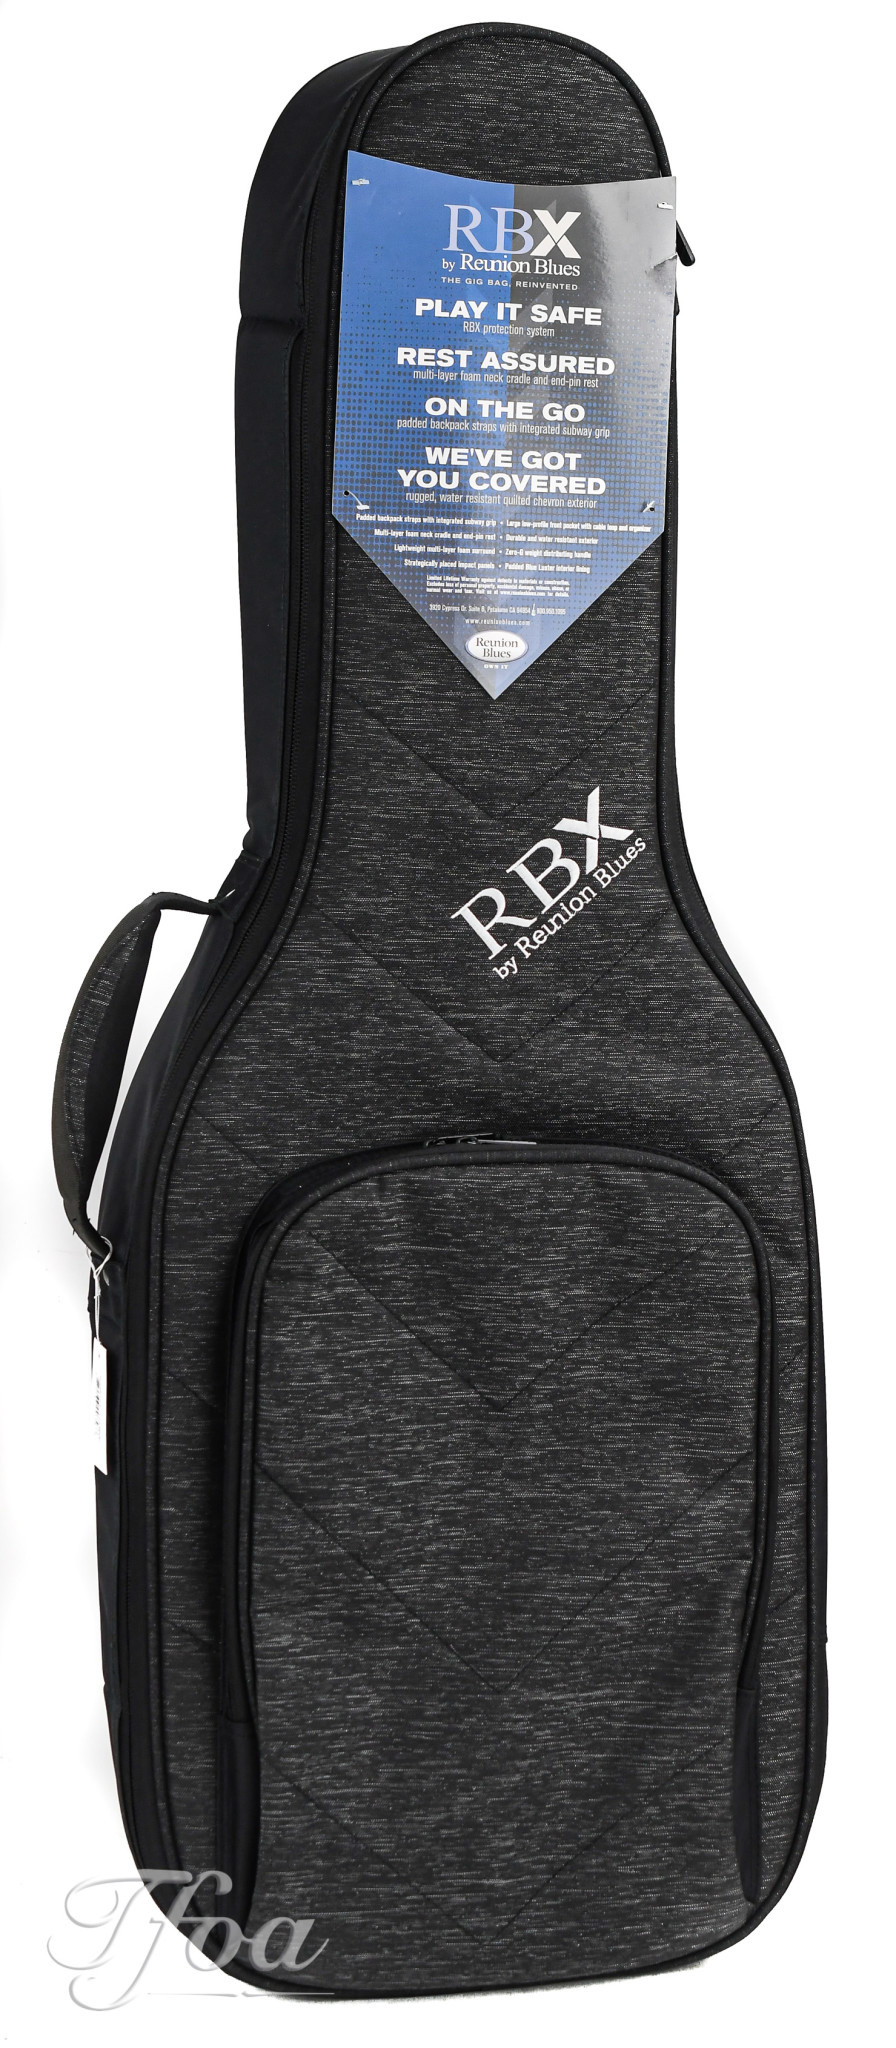 Reunion Blues Rbx Oxford Electric Guitar Gig Bag The Fellowshop Of Acoustics - rbx multi